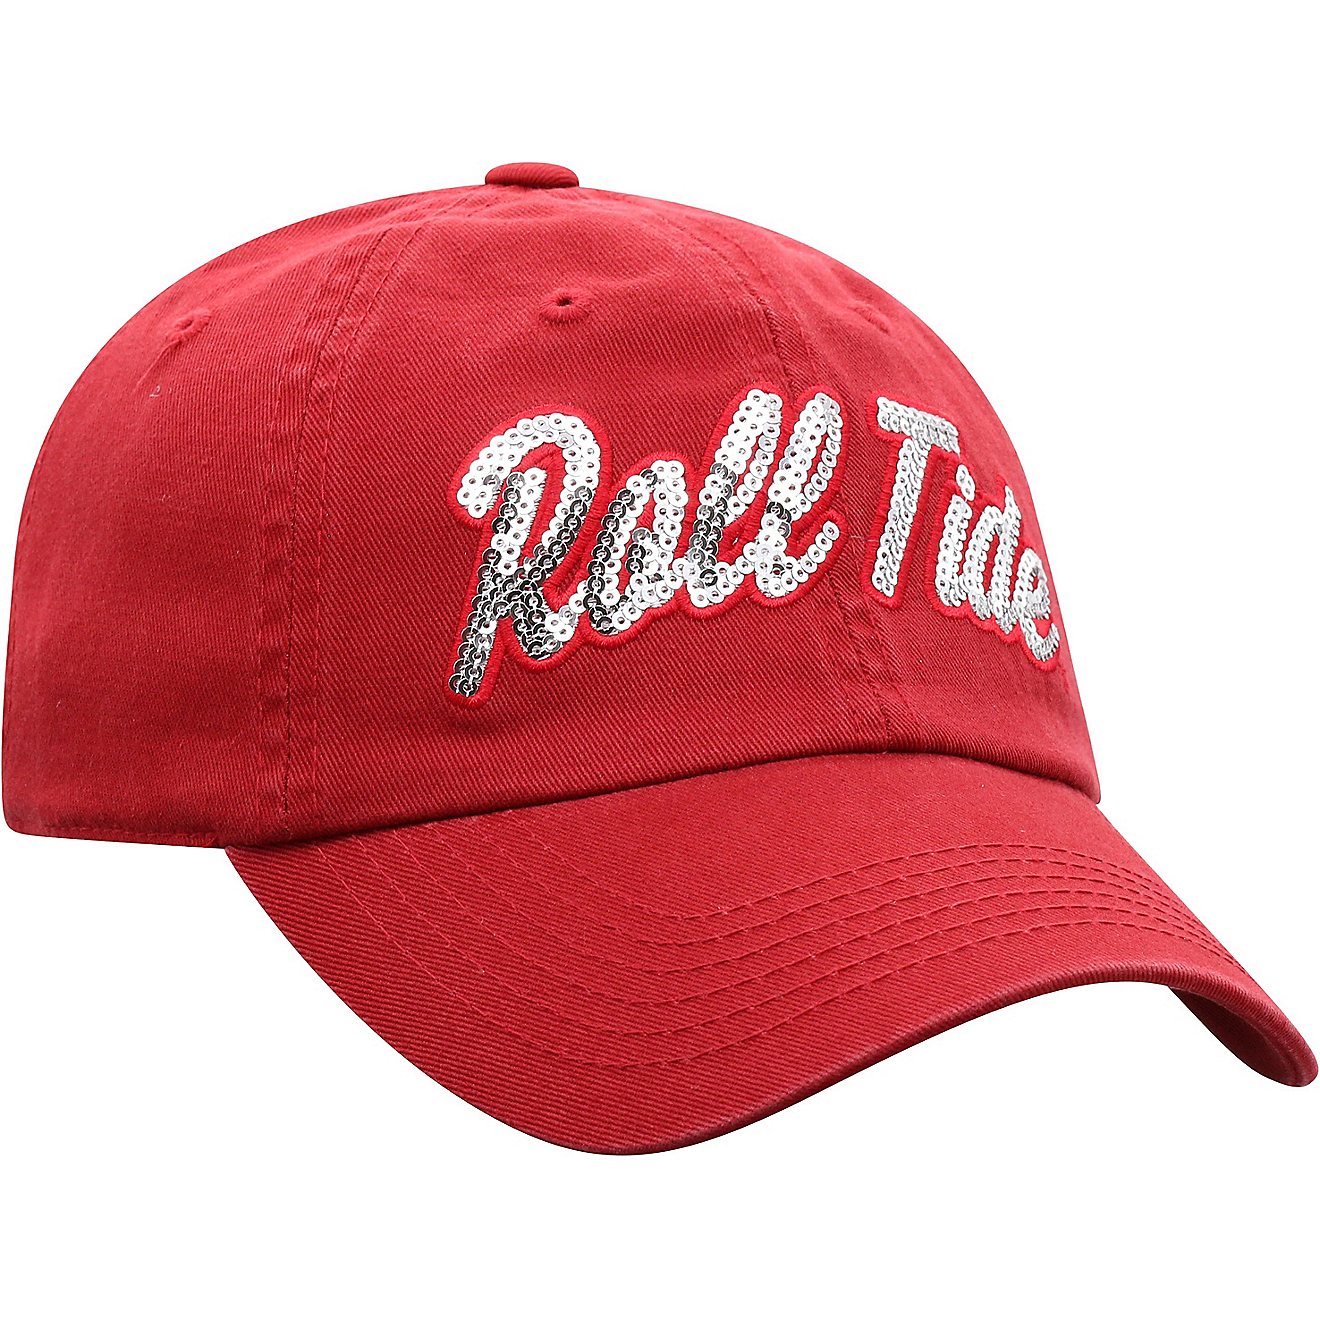 Top of the World University Of Alabama Sequential 1 Adjustable Cap                                                               - view number 4